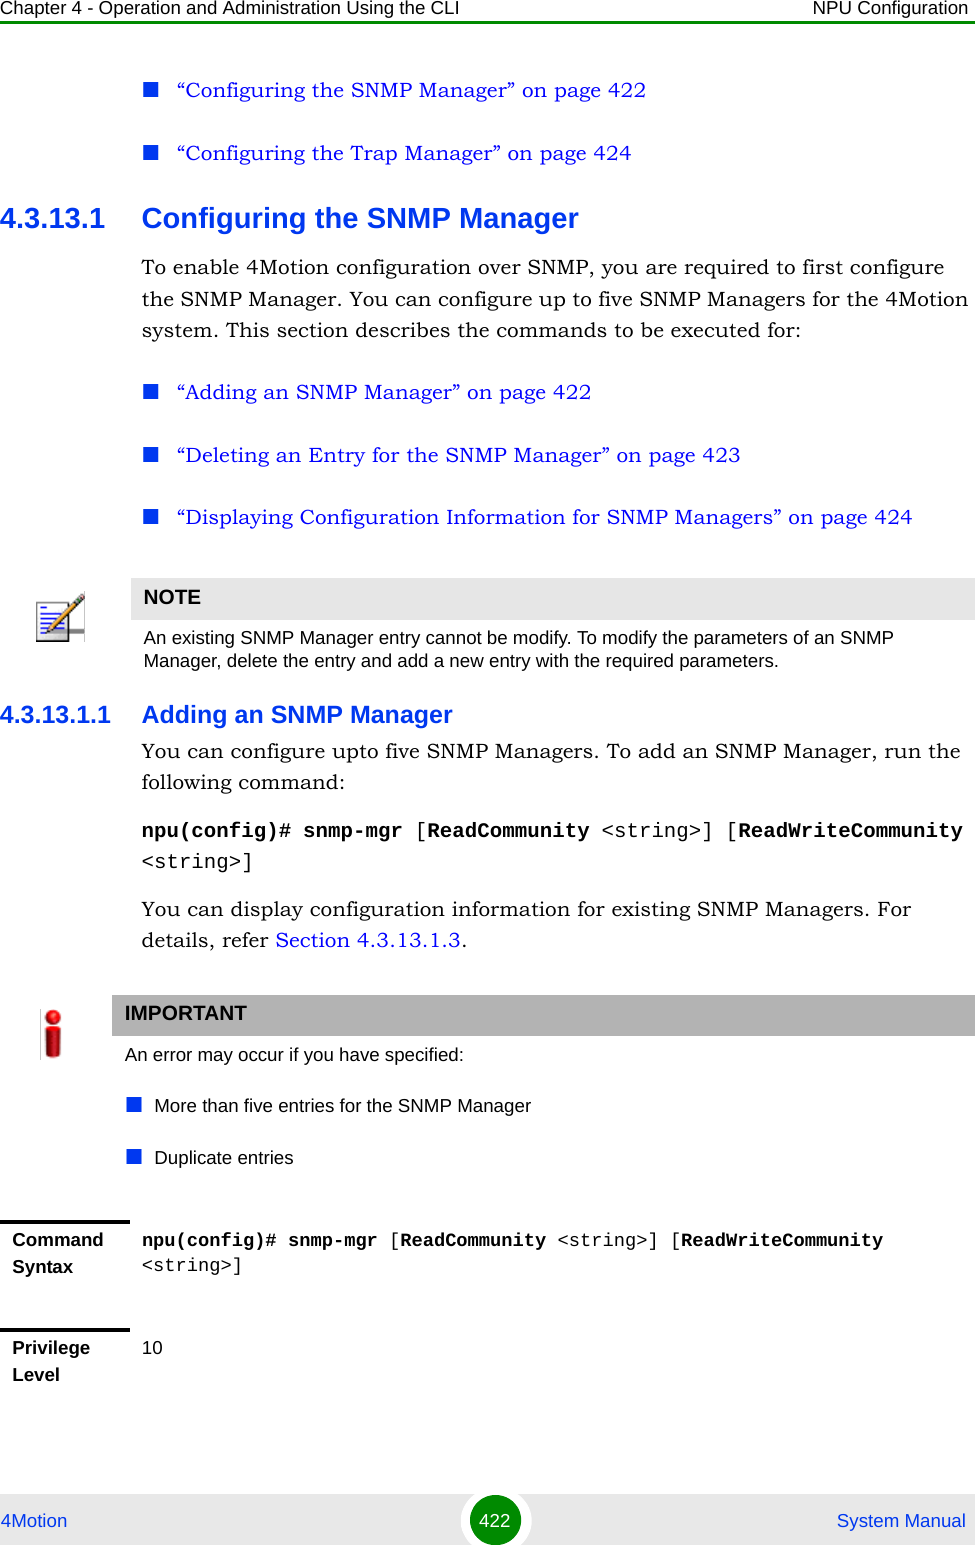 Chapter 4 - Operation and Administration Using the CLI NPU Configuration4Motion 422  System Manual“Configuring the SNMP Manager” on page 422“Configuring the Trap Manager” on page 4244.3.13.1 Configuring the SNMP ManagerTo enable 4Motion configuration over SNMP, you are required to first configure the SNMP Manager. You can configure up to five SNMP Managers for the 4Motion system. This section describes the commands to be executed for:“Adding an SNMP Manager” on page 422“Deleting an Entry for the SNMP Manager” on page 423“Displaying Configuration Information for SNMP Managers” on page 4244.3.13.1.1 Adding an SNMP ManagerYou can configure upto five SNMP Managers. To add an SNMP Manager, run the following command:npu(config)# snmp-mgr [ReadCommunity &lt;string&gt;] [ReadWriteCommunity &lt;string&gt;]You can display configuration information for existing SNMP Managers. For details, refer Section 4.3.13.1.3.NOTEAn existing SNMP Manager entry cannot be modify. To modify the parameters of an SNMP Manager, delete the entry and add a new entry with the required parameters.IMPORTANTAn error may occur if you have specified:More than five entries for the SNMP Manager Duplicate entriesCommand Syntaxnpu(config)# snmp-mgr [ReadCommunity &lt;string&gt;] [ReadWriteCommunity &lt;string&gt;]Privilege Level10